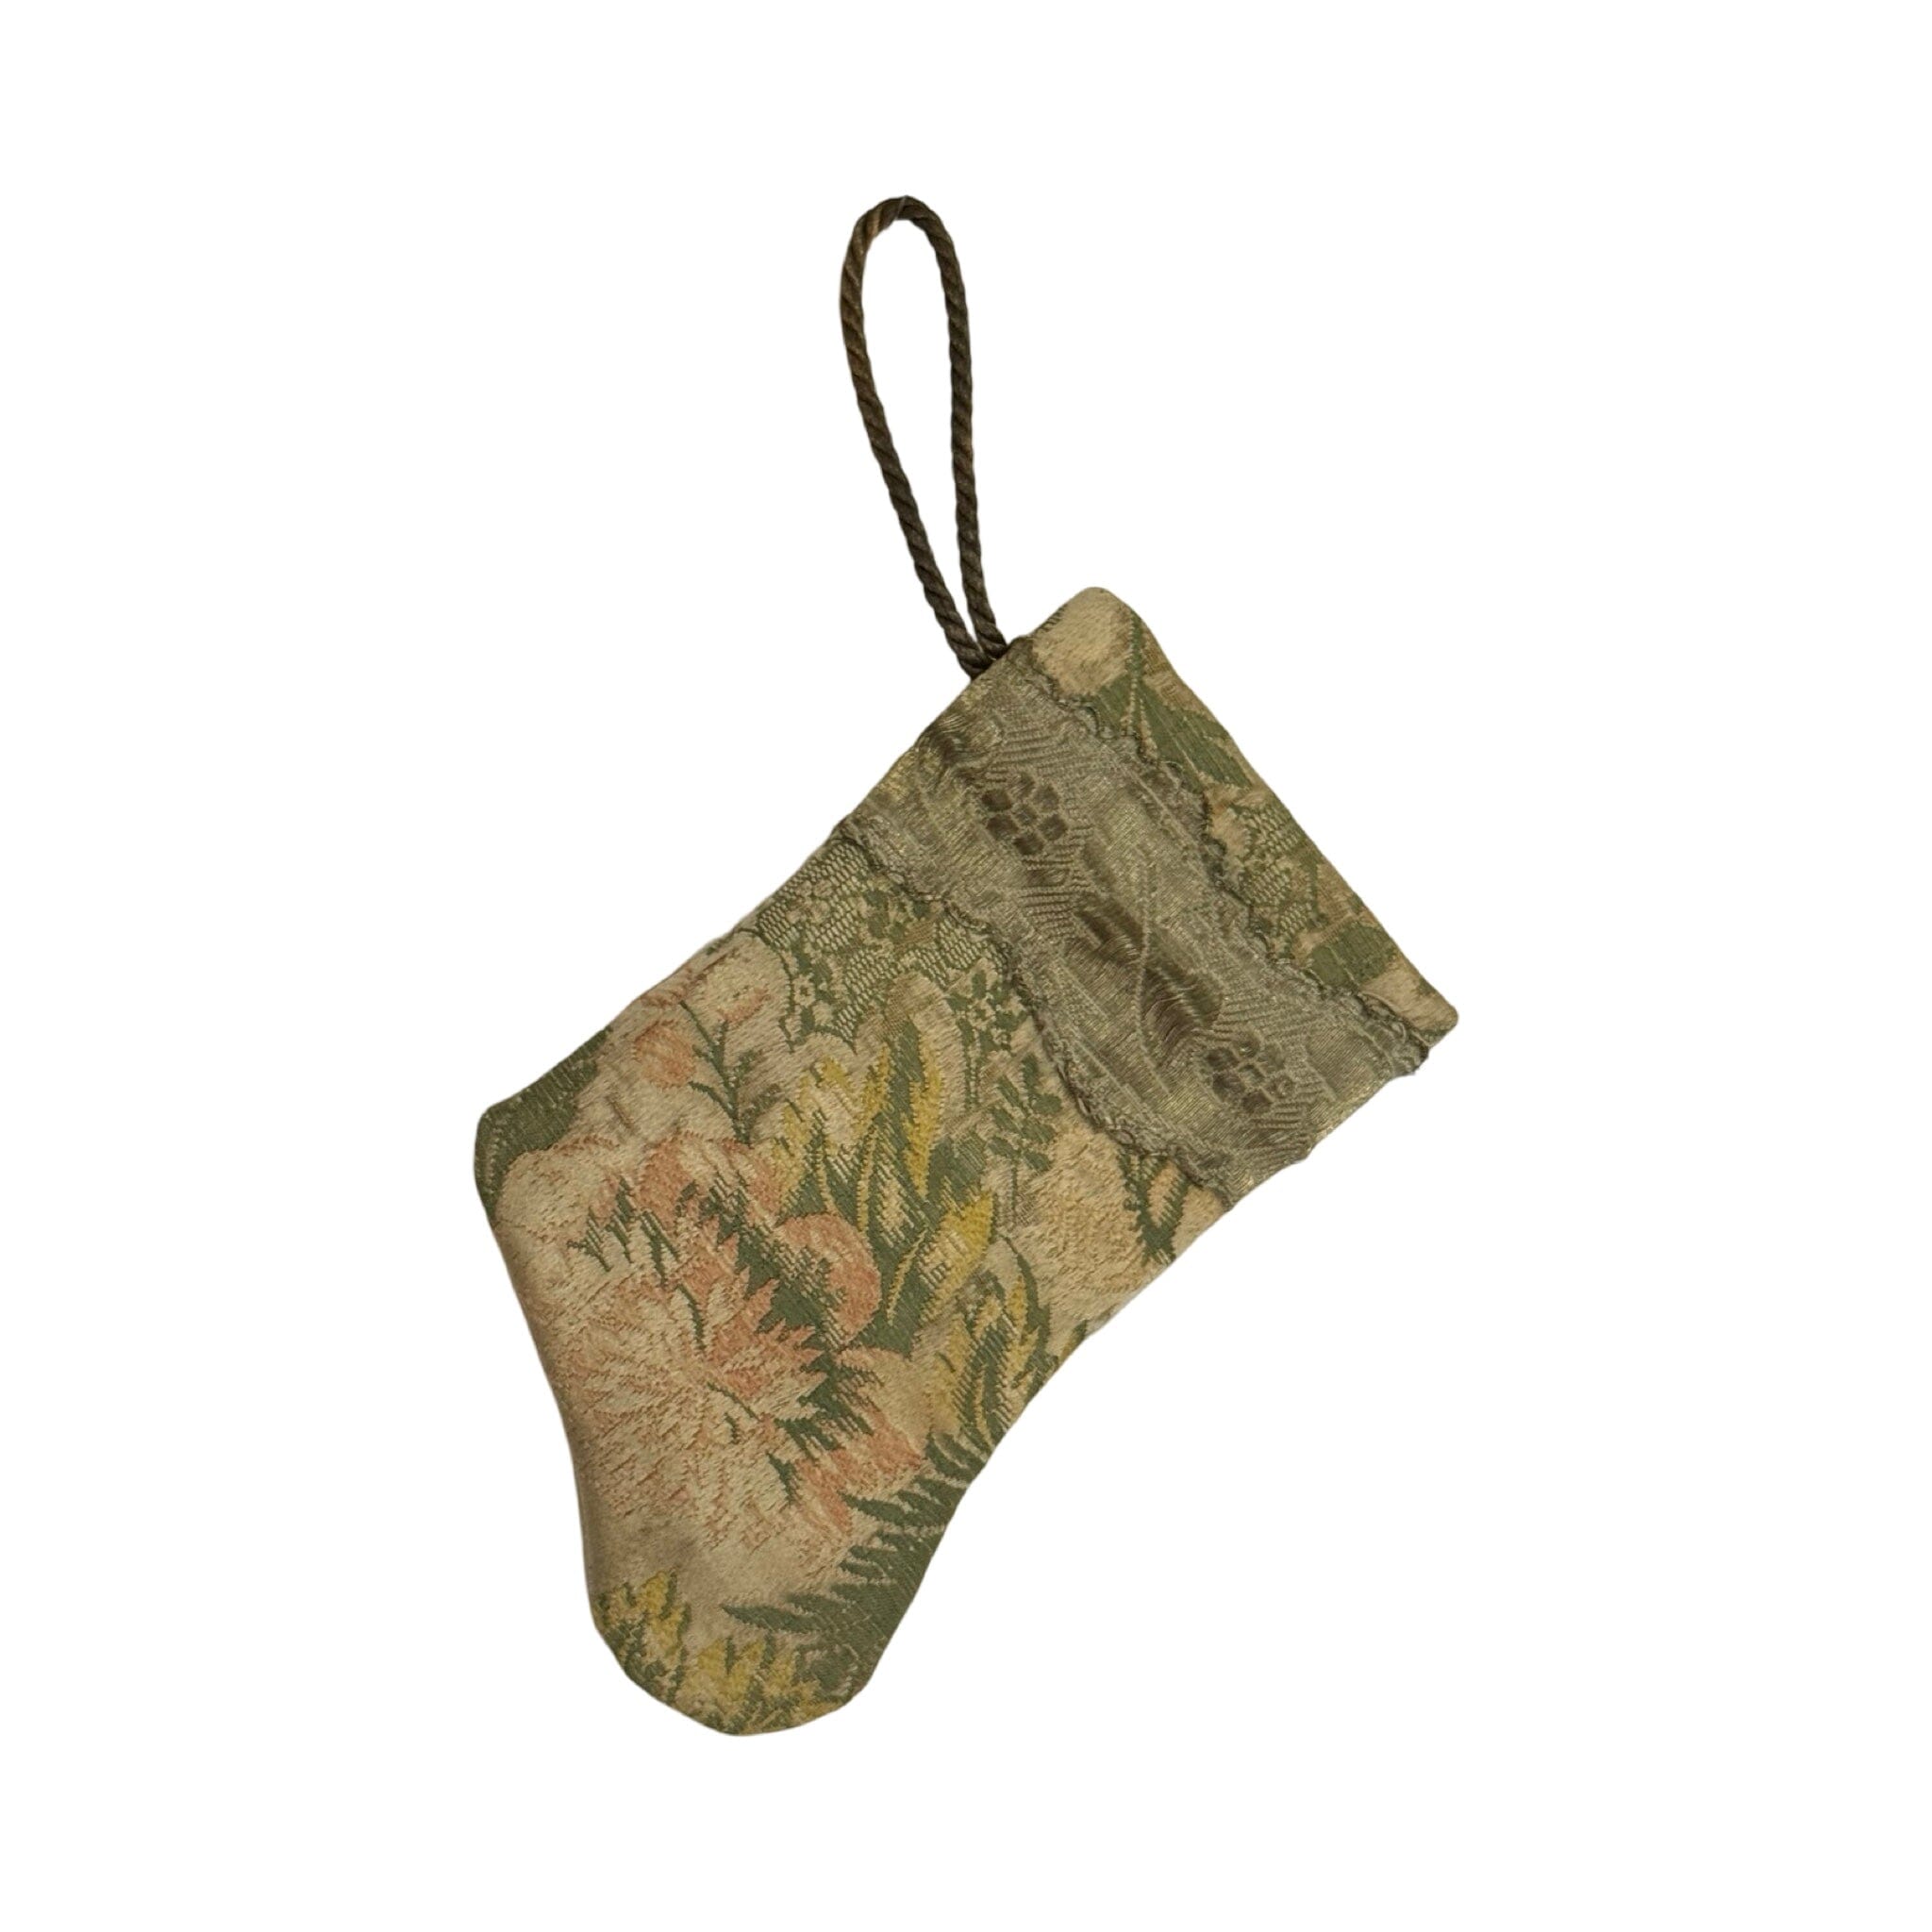 Handmade Mini Stocking Made From Vintage Fabric and Trims- Green and Gold Ornament B. Viz Design C 